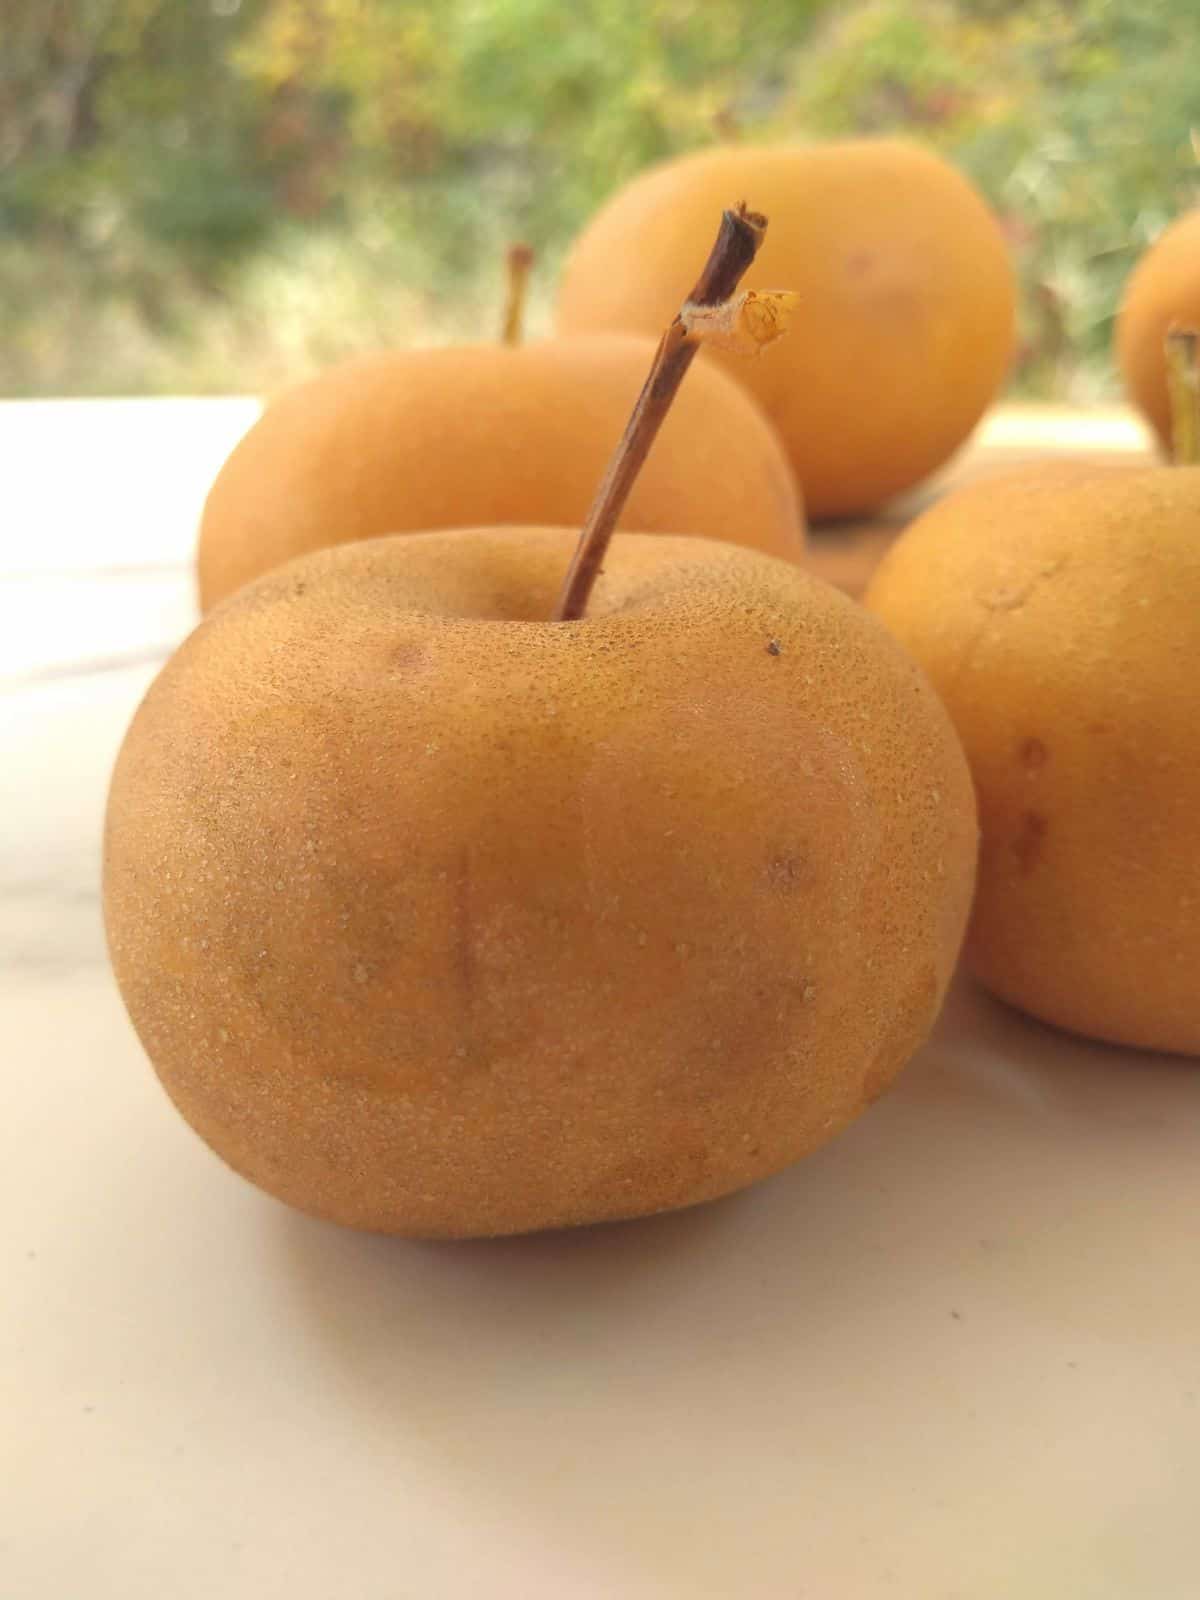 A close up view of the side of some Asian pears sitting on a white surface.